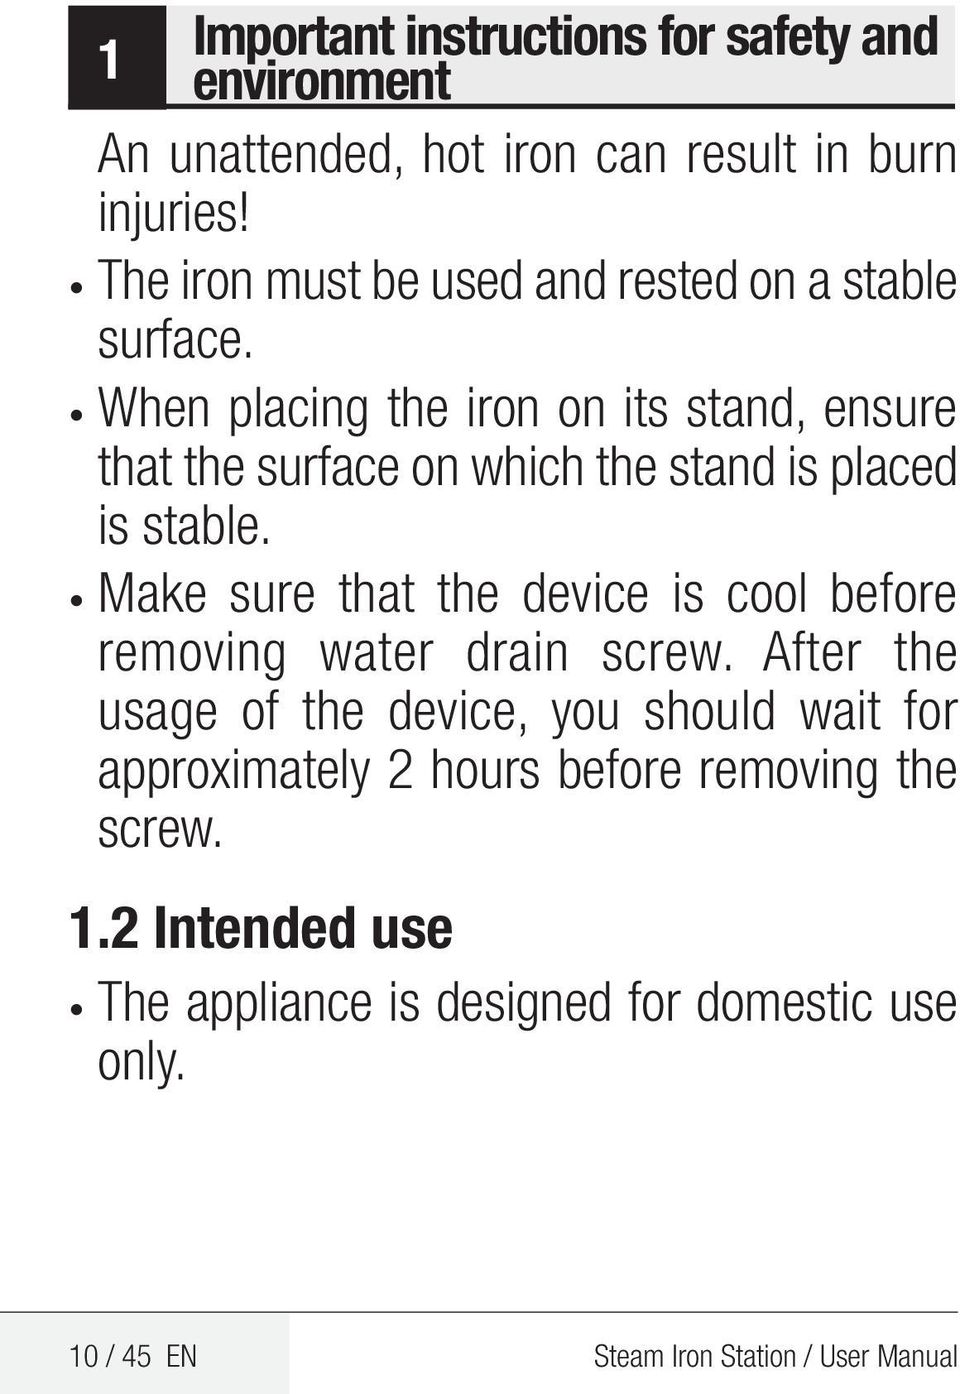 When placing the iron on its stand, ensure that the surface on which the stand is placed is stable.